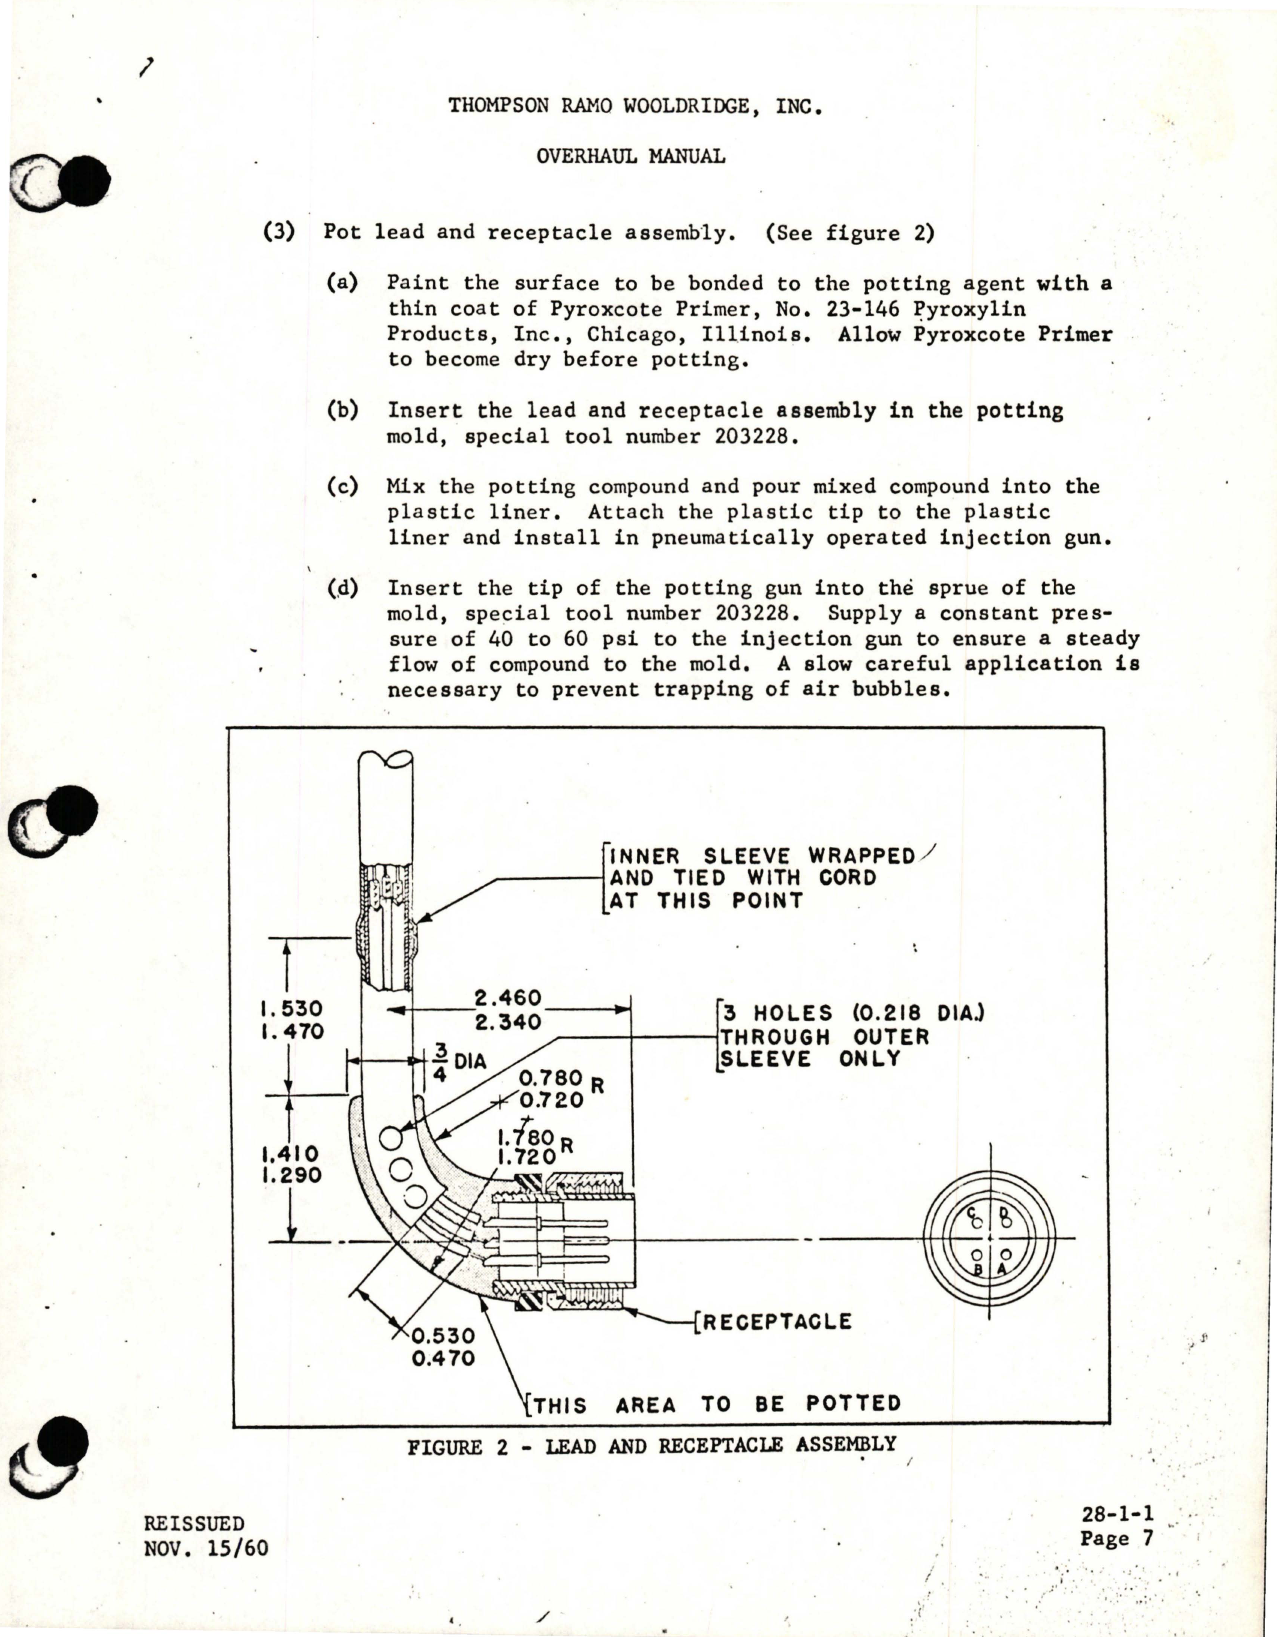 Sample page 7 from AirCorps Library document: Overhaul Manual for Fuel Booster Pump - Model TB127300-1